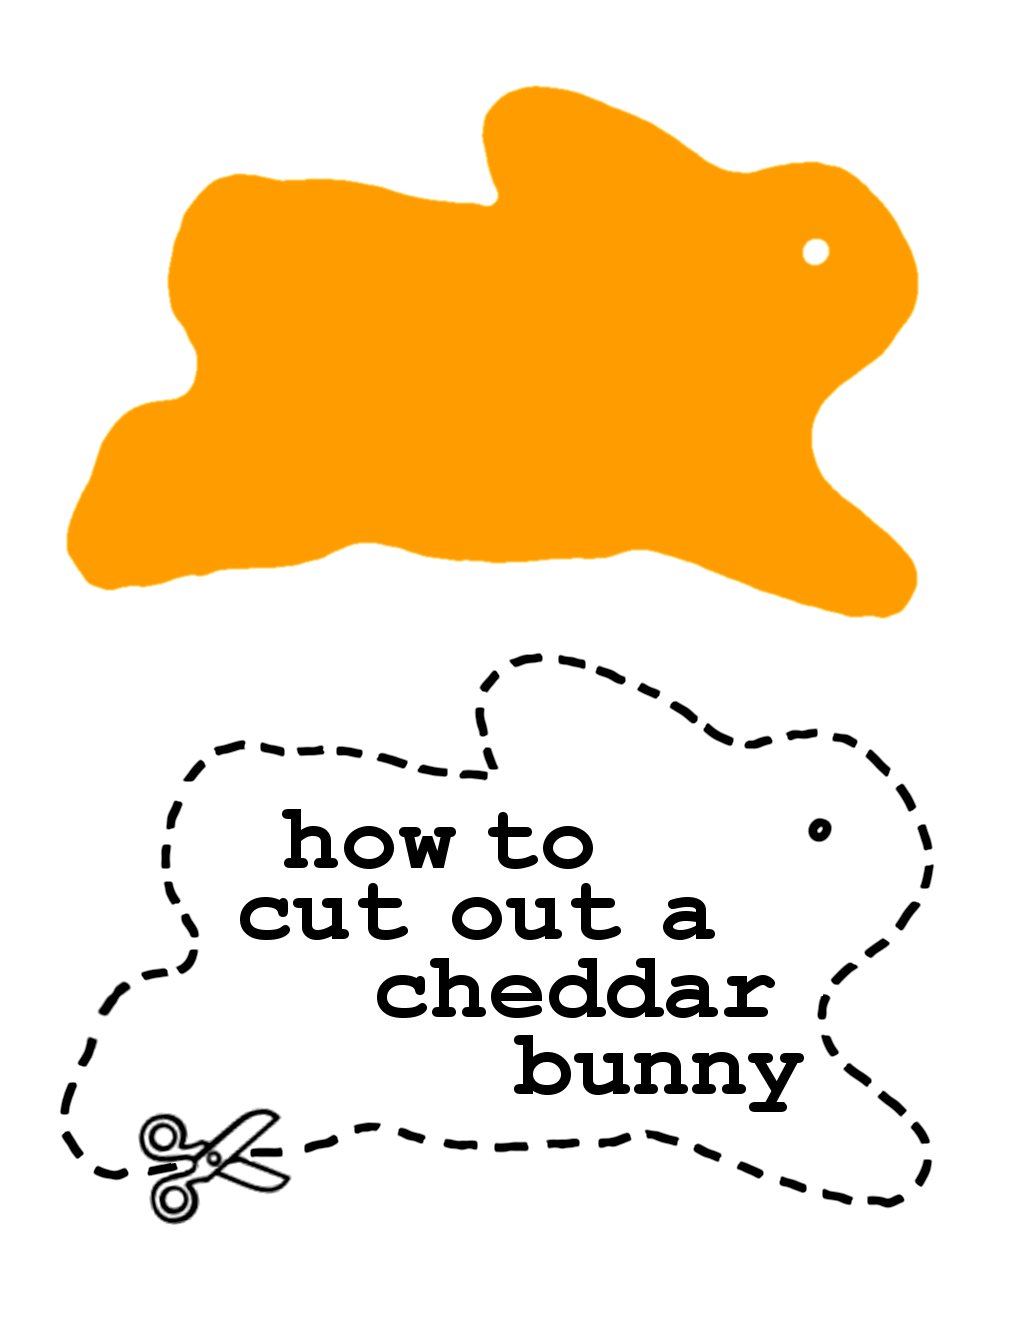 [how+to+cut+out+a+cheddar+bunny.jpg]